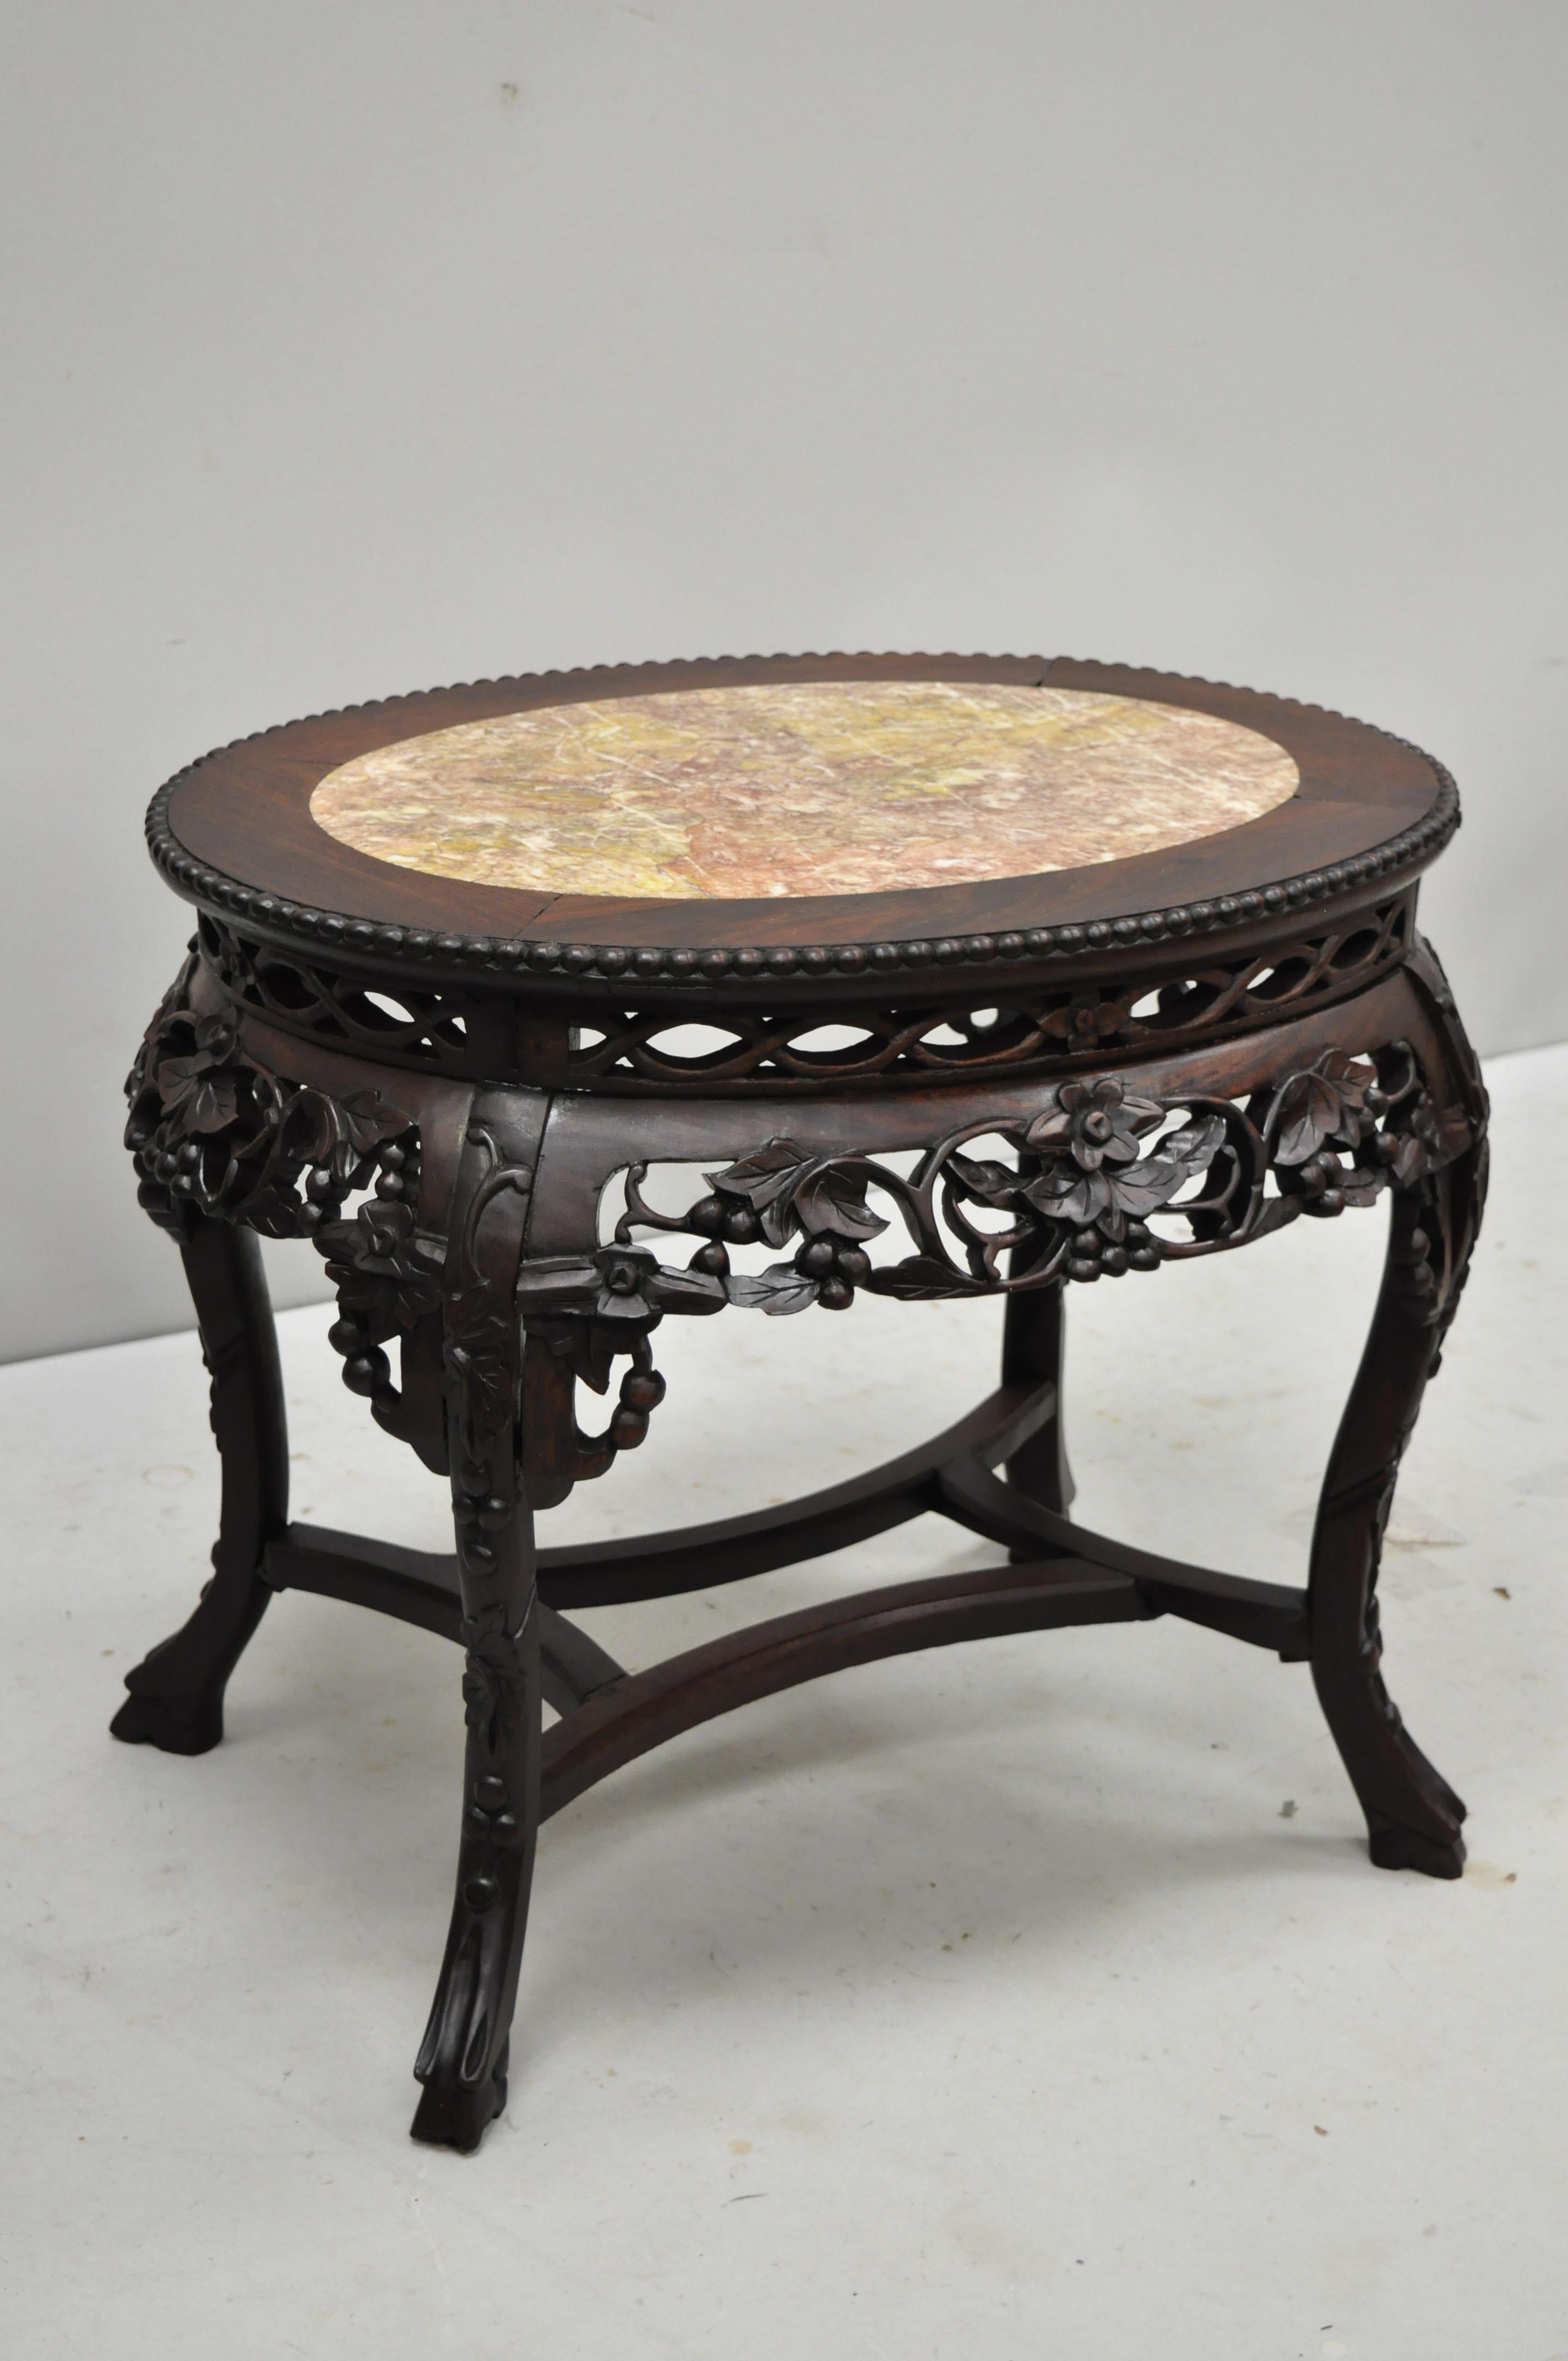 Antique carved hardwood rosewood and marble oval top Chinese coffee table (F). Item features inset marble top, pierce carved floral skirt, carved stretcher base, solid wood construction, finely carved details, very nice antique item, circa late